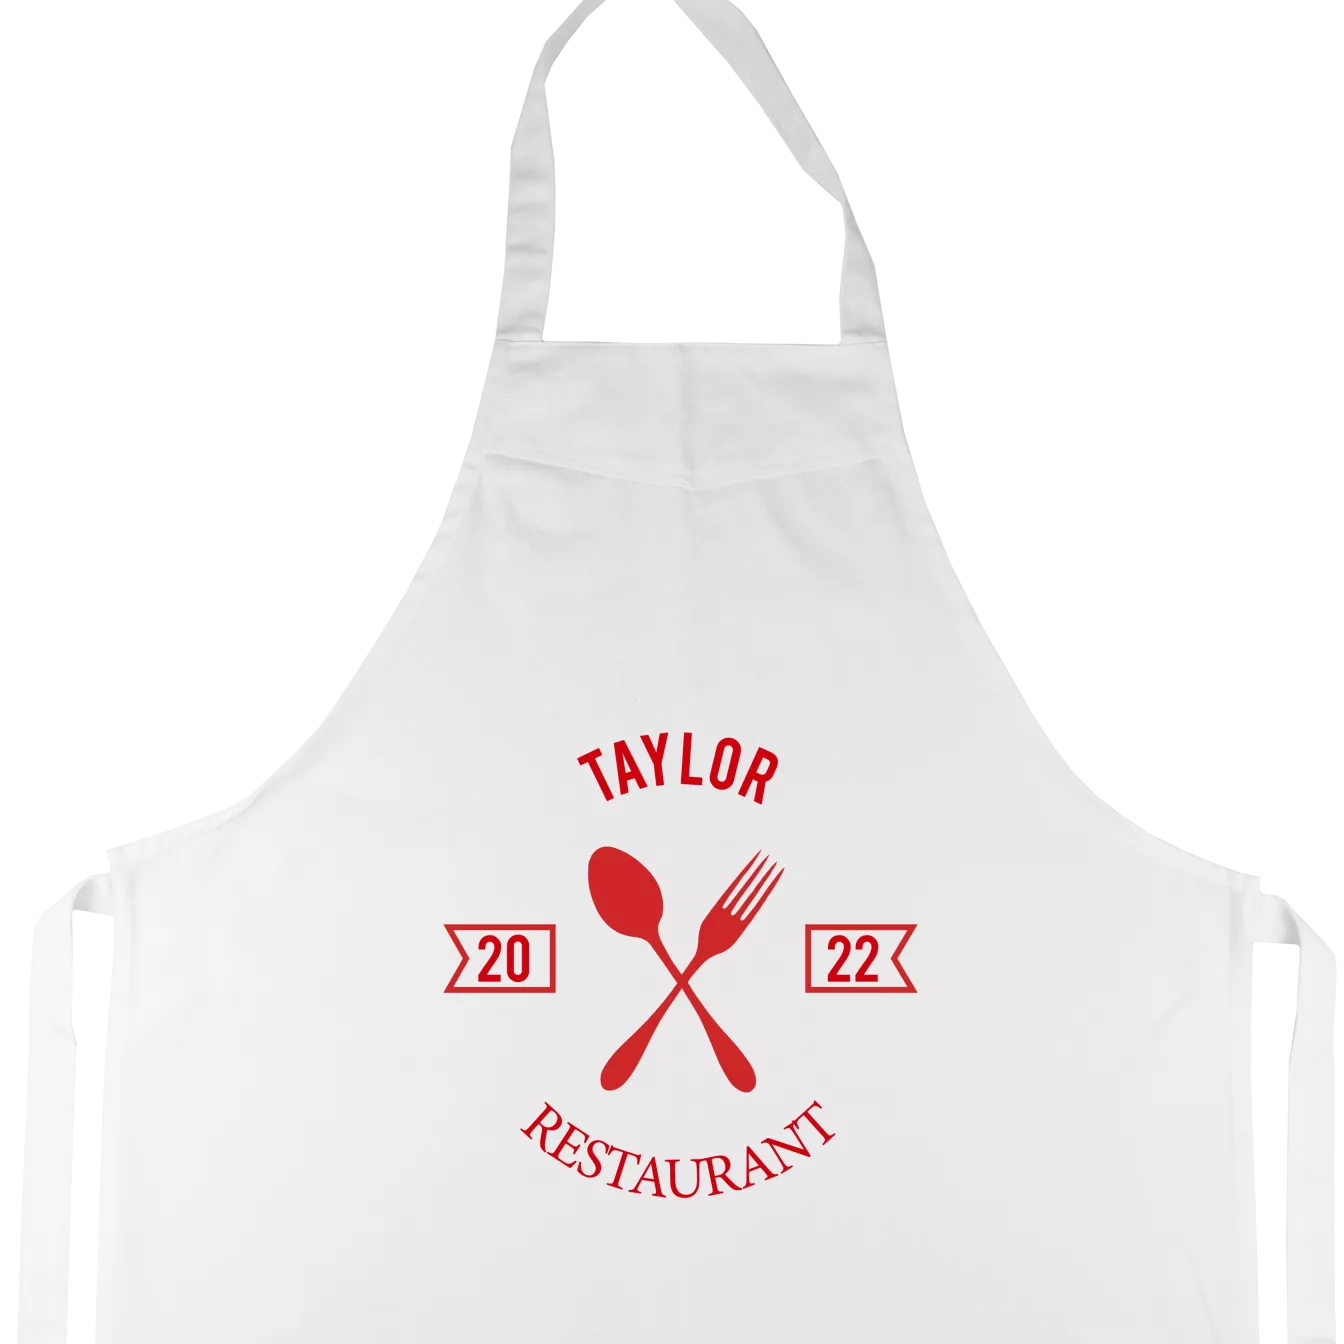 Mothers Day cooking apron with name, Design it at